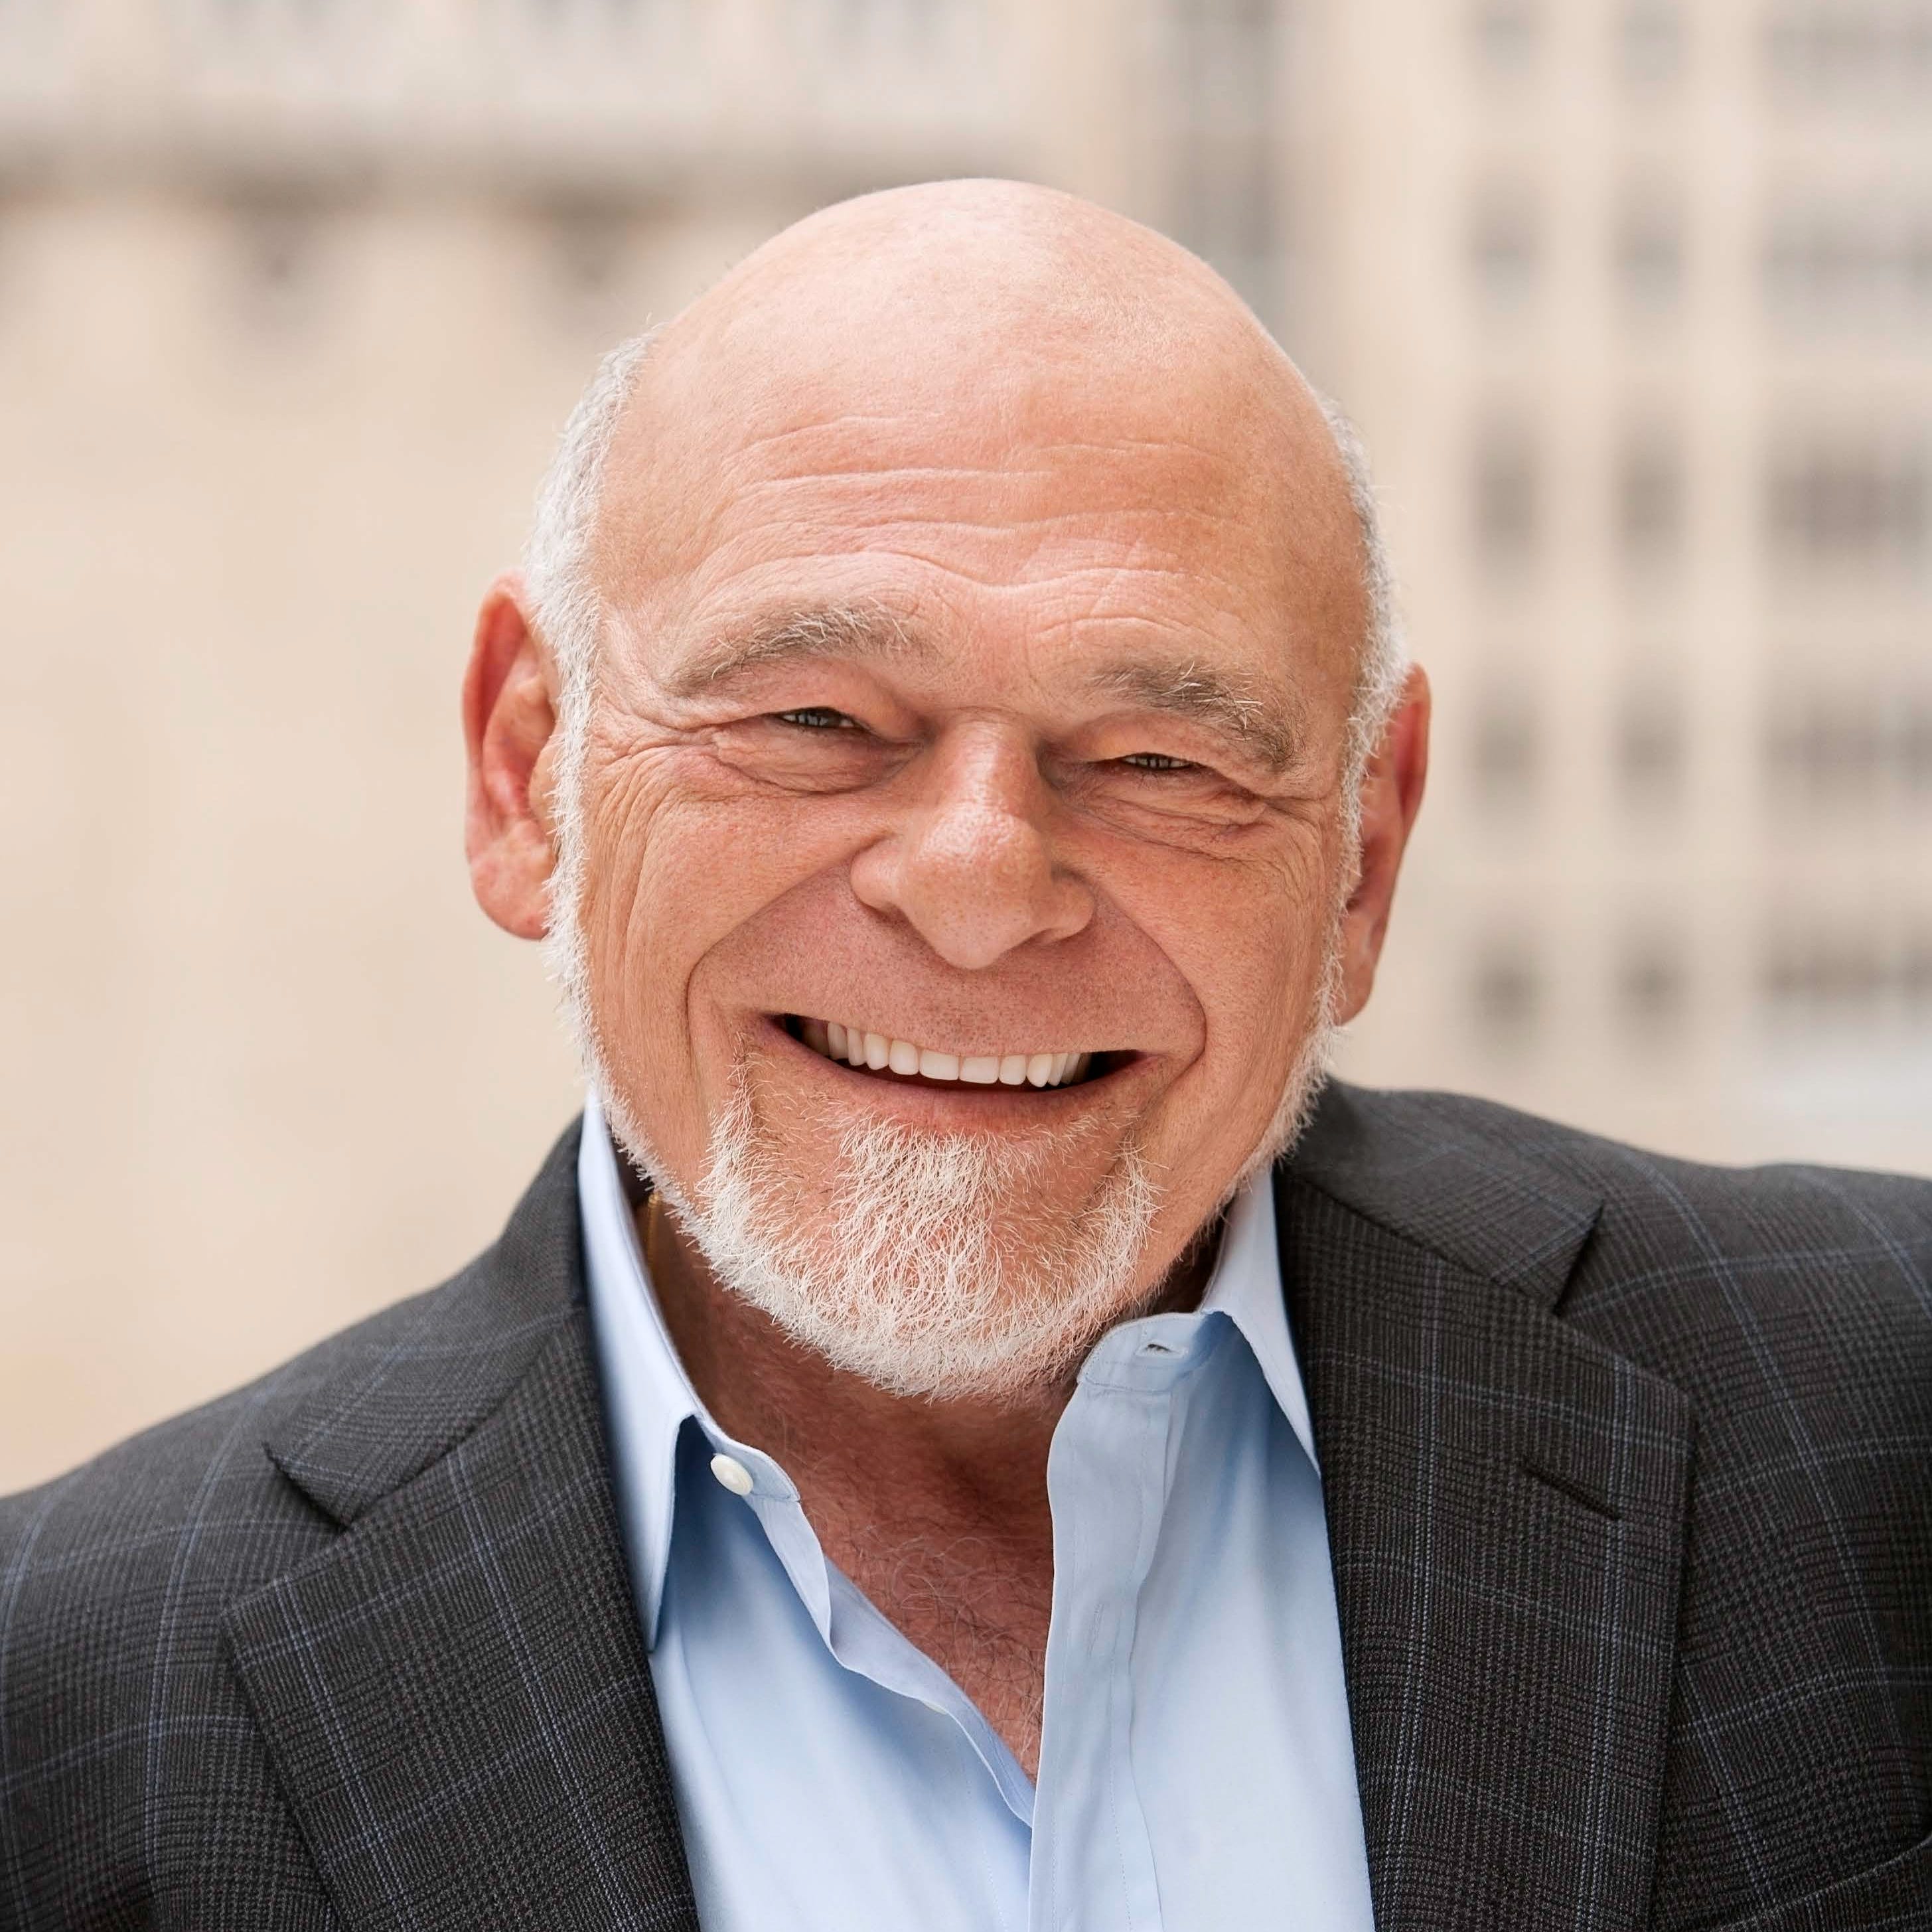 Sam Zell, Founder and Chairman, Equity Group Investments